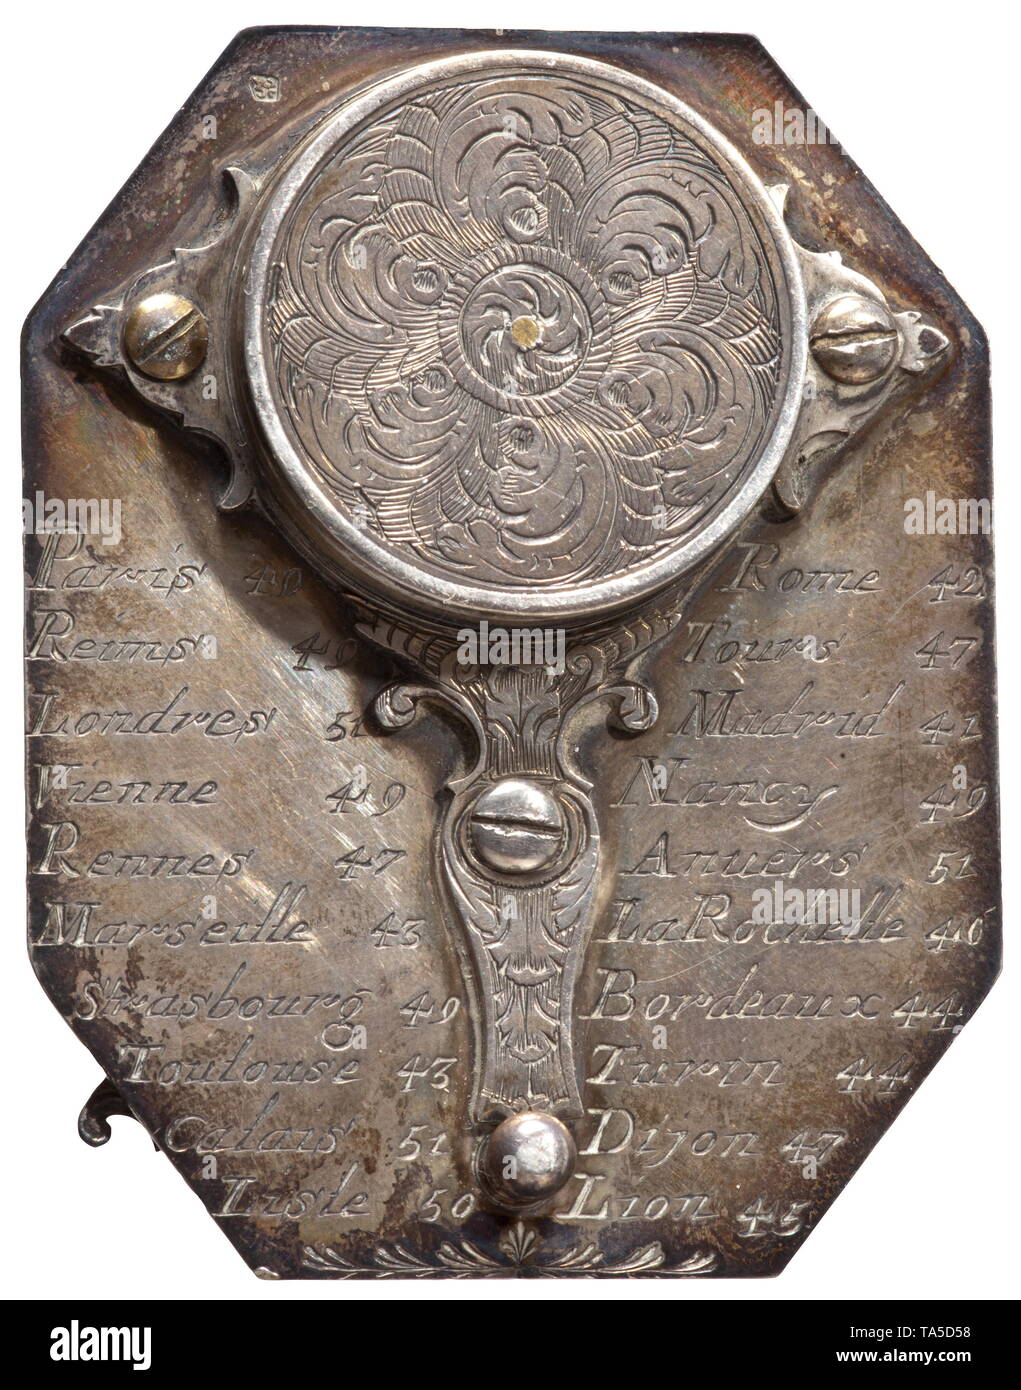 A silver sundial, Paris, 18th century Octagonal plate with finely engraved scale and signature 'Chapotot Ã  Paris'. Adjustable collapsible hand with base in the shape of a bird, the compass with intact glass lid. On the back a list of European cities with the corresponding settings. Dimensions 57 x 47 cm. historic, historical, handicrafts, handcraft, craft, object, objects, stills, clipping, clippings, cut out, cut-out, cut-outs, 18th century, Additional-Rights-Clearance-Info-Not-Available Stock Photo